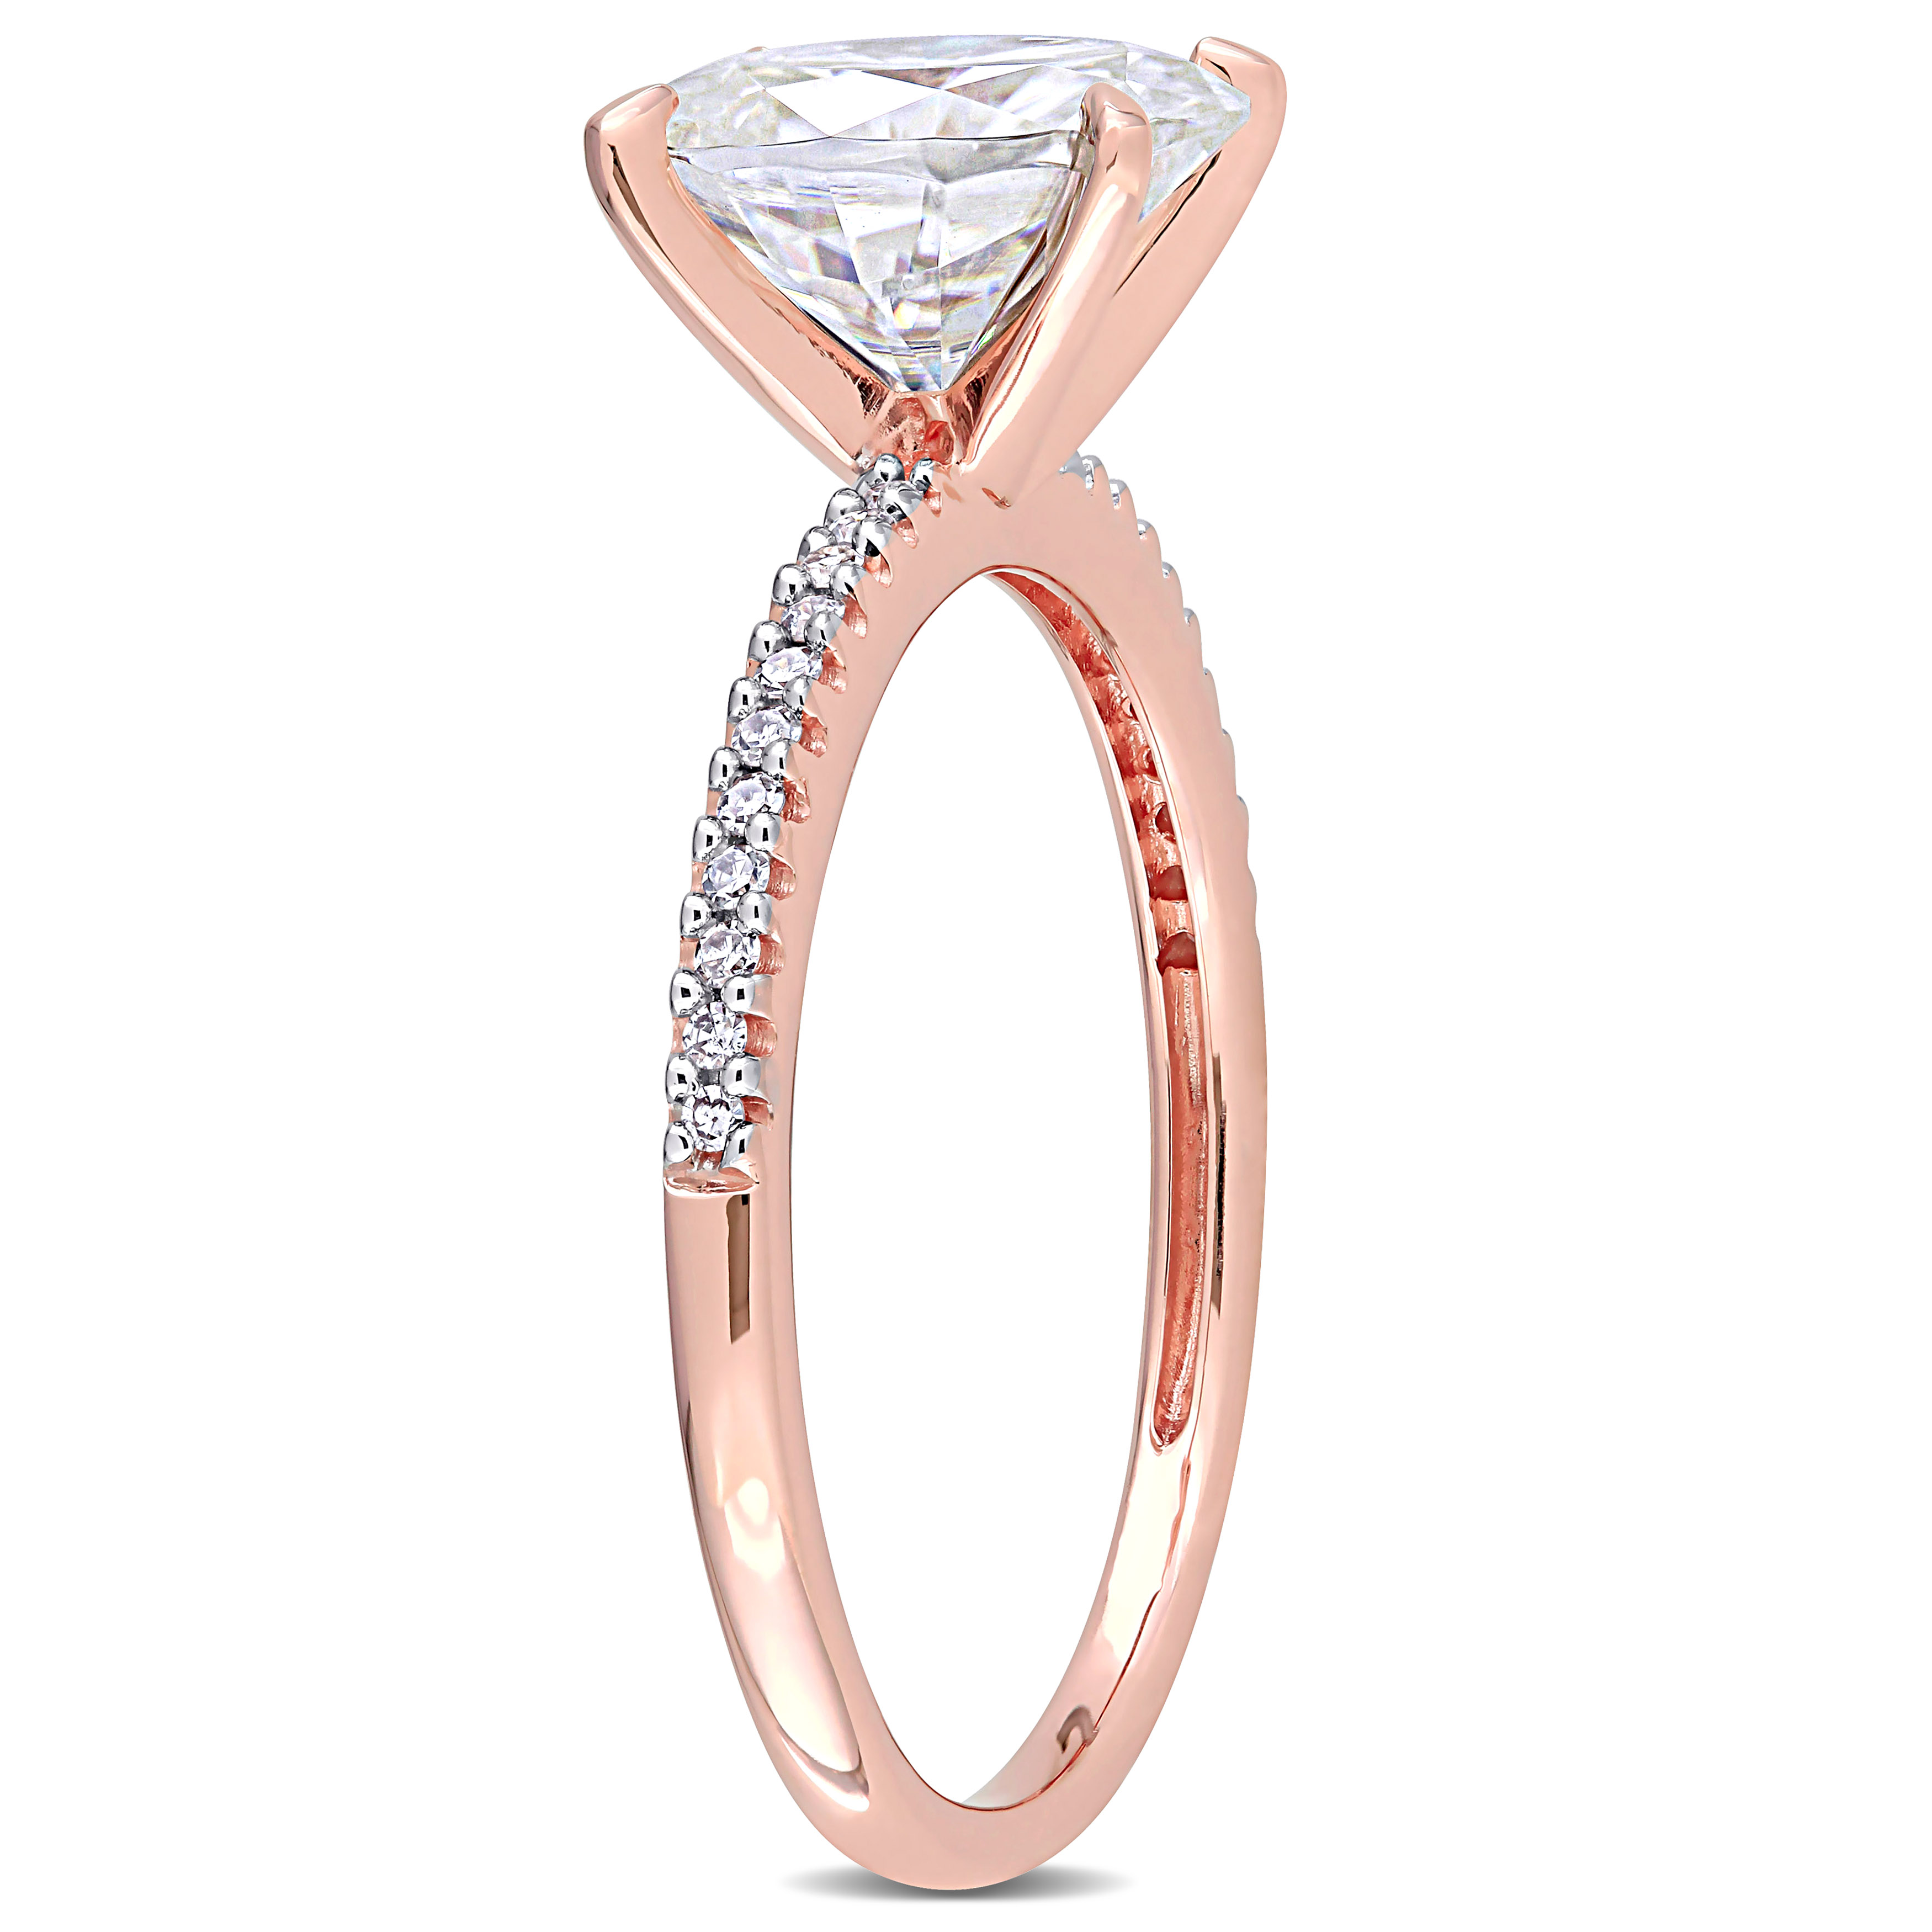 2 CT DEW Created Moissanite Oval Solitaire and 1/10 CT TW Diamond Engagement Ring in 14k Rose Gold